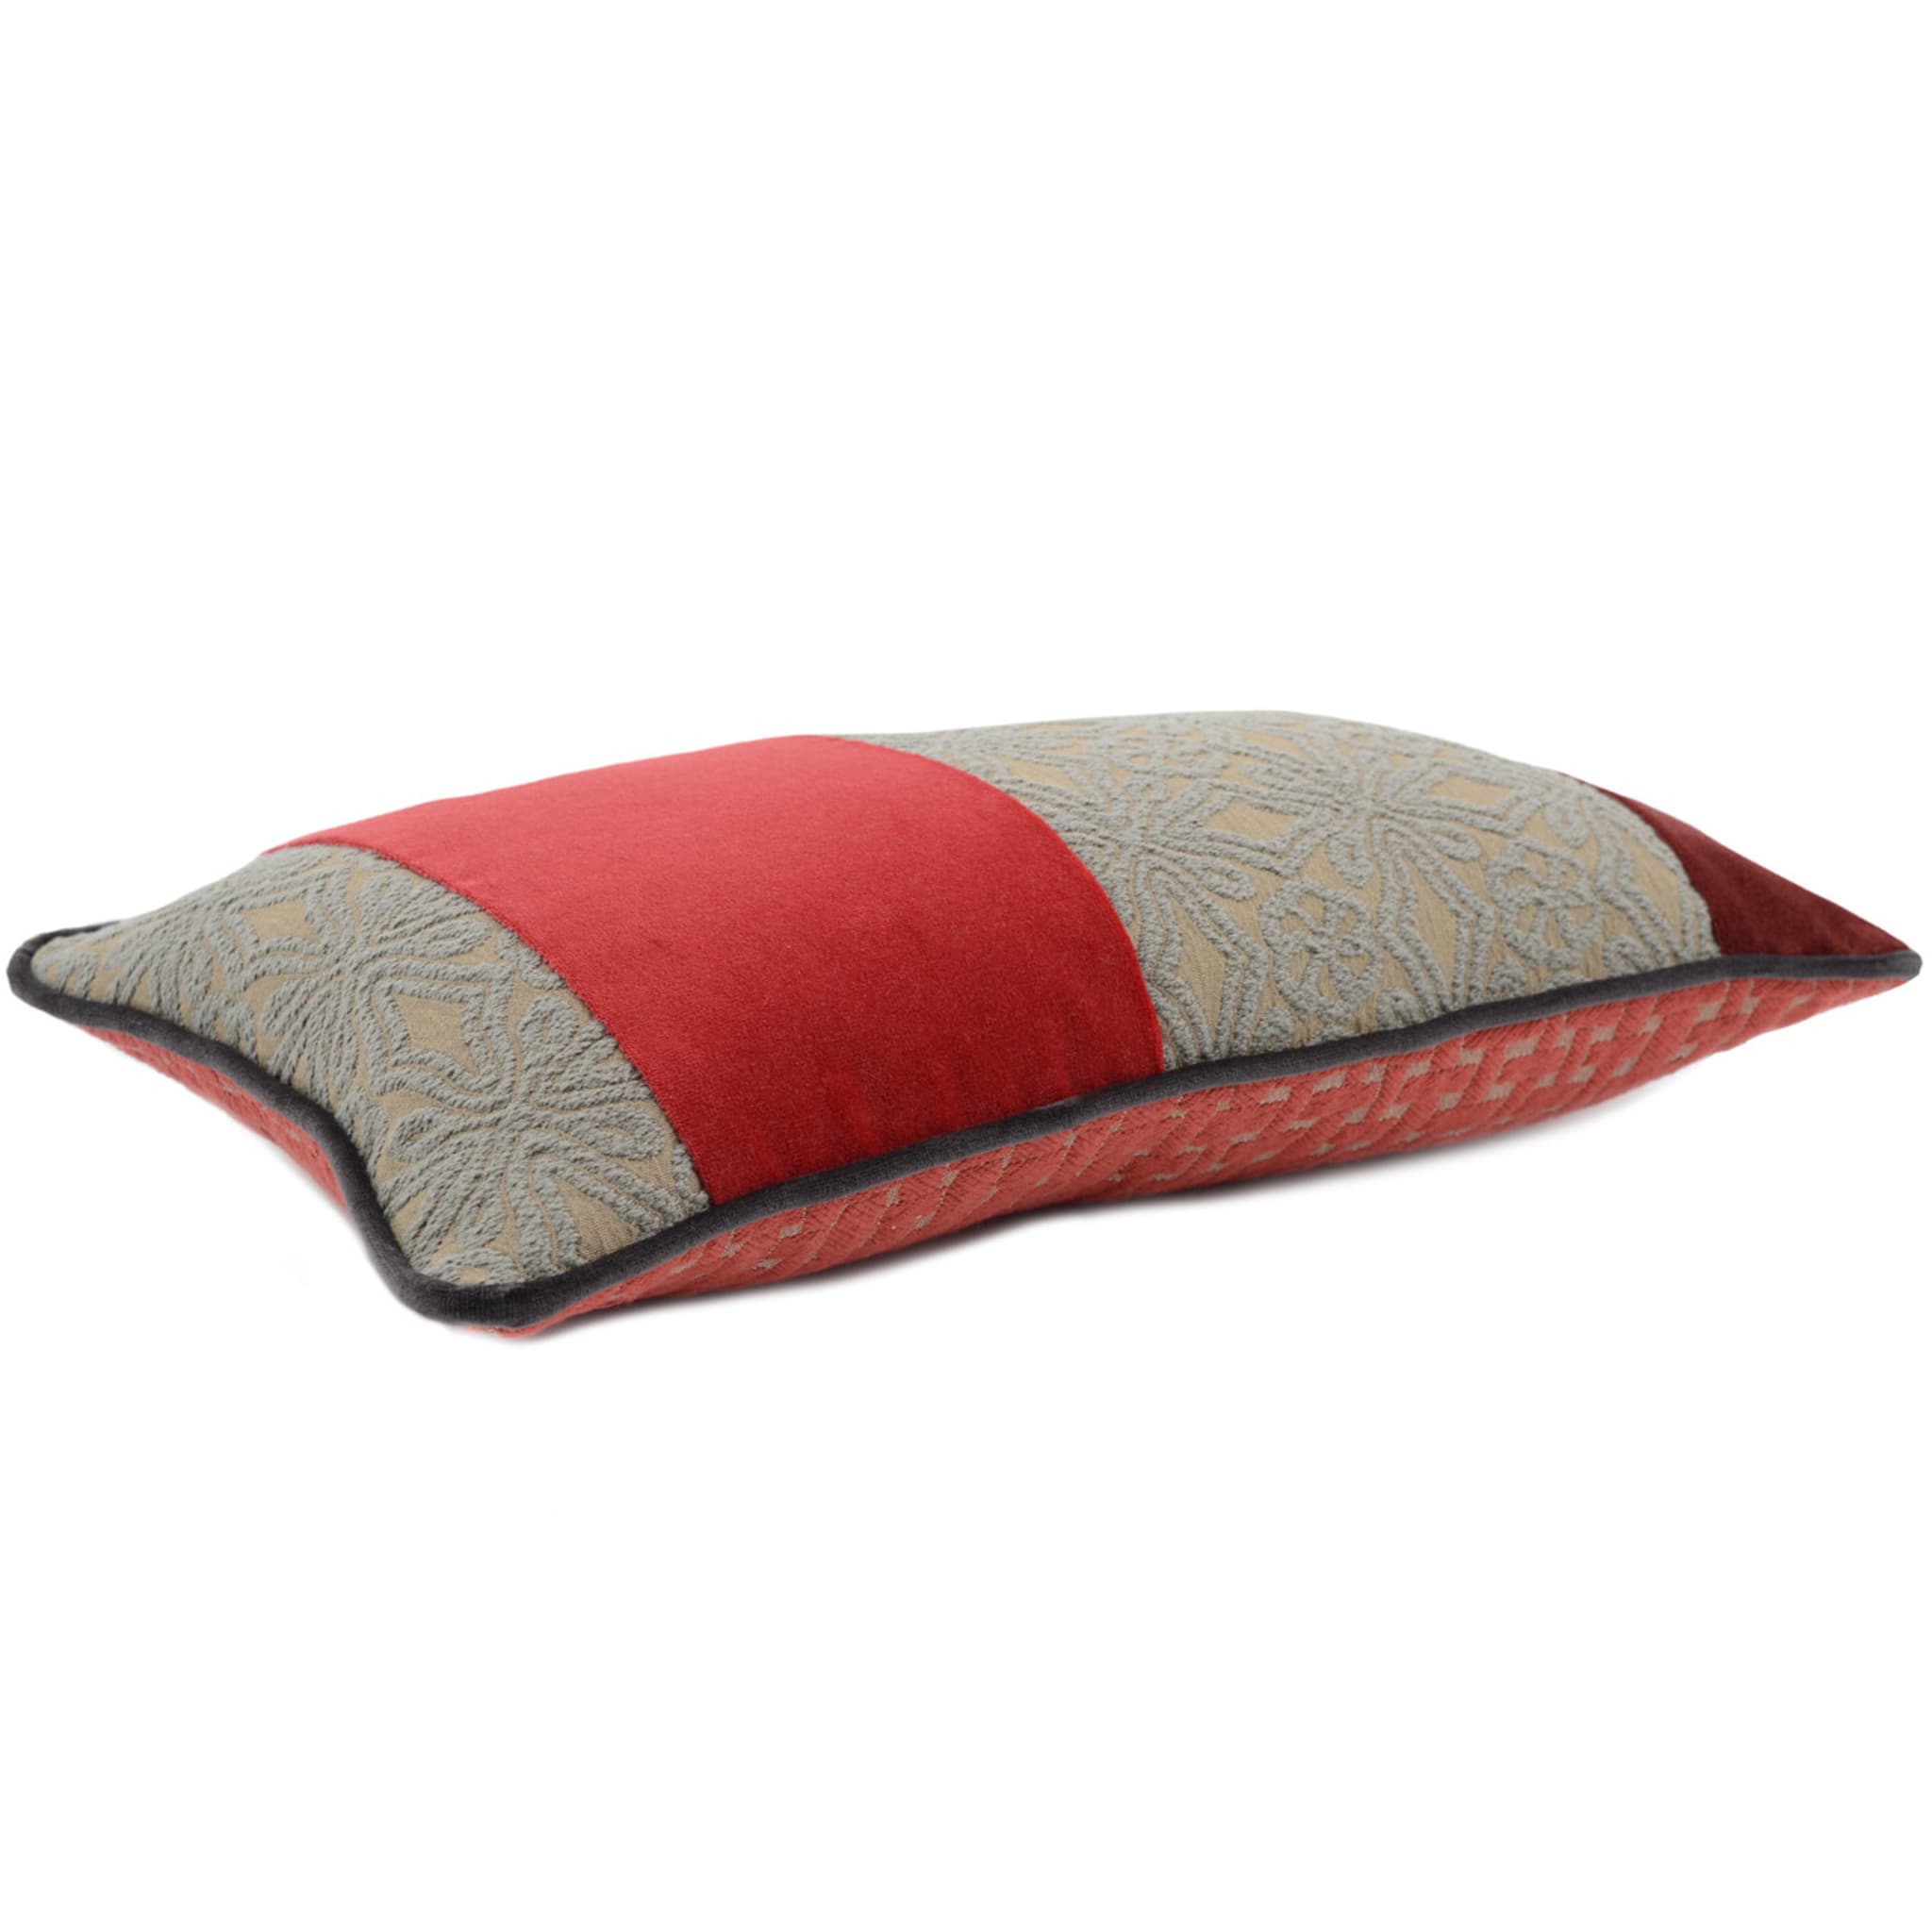 Bandé Cushion in jacquard fabric and cotton velvet - Alternative view 1